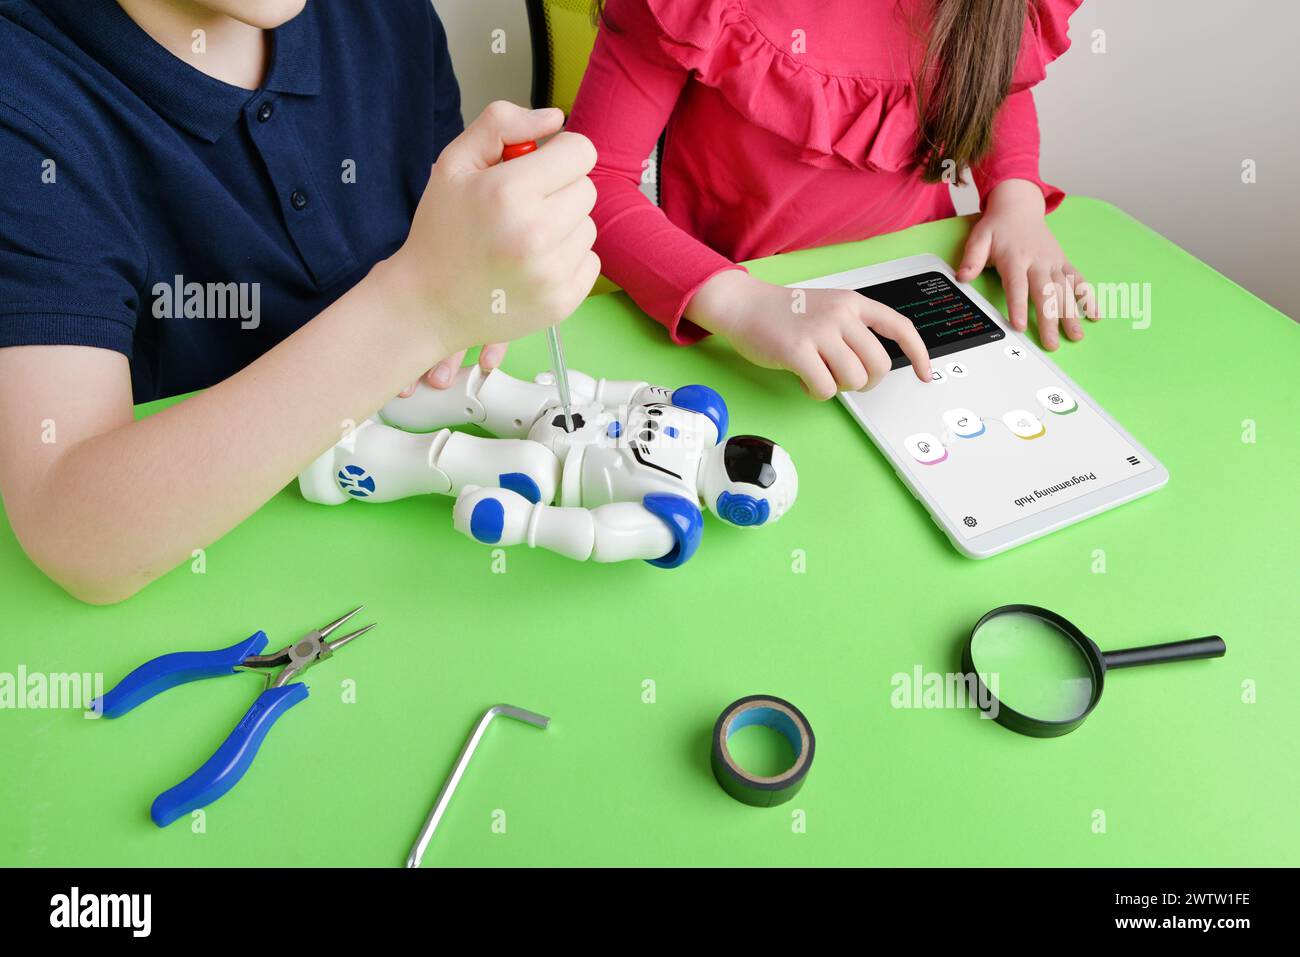 Children's hands assemble robot on workbench, screwing parts while reviewing programming code on tablet. Concept of learning and hands-on education Stock Photo